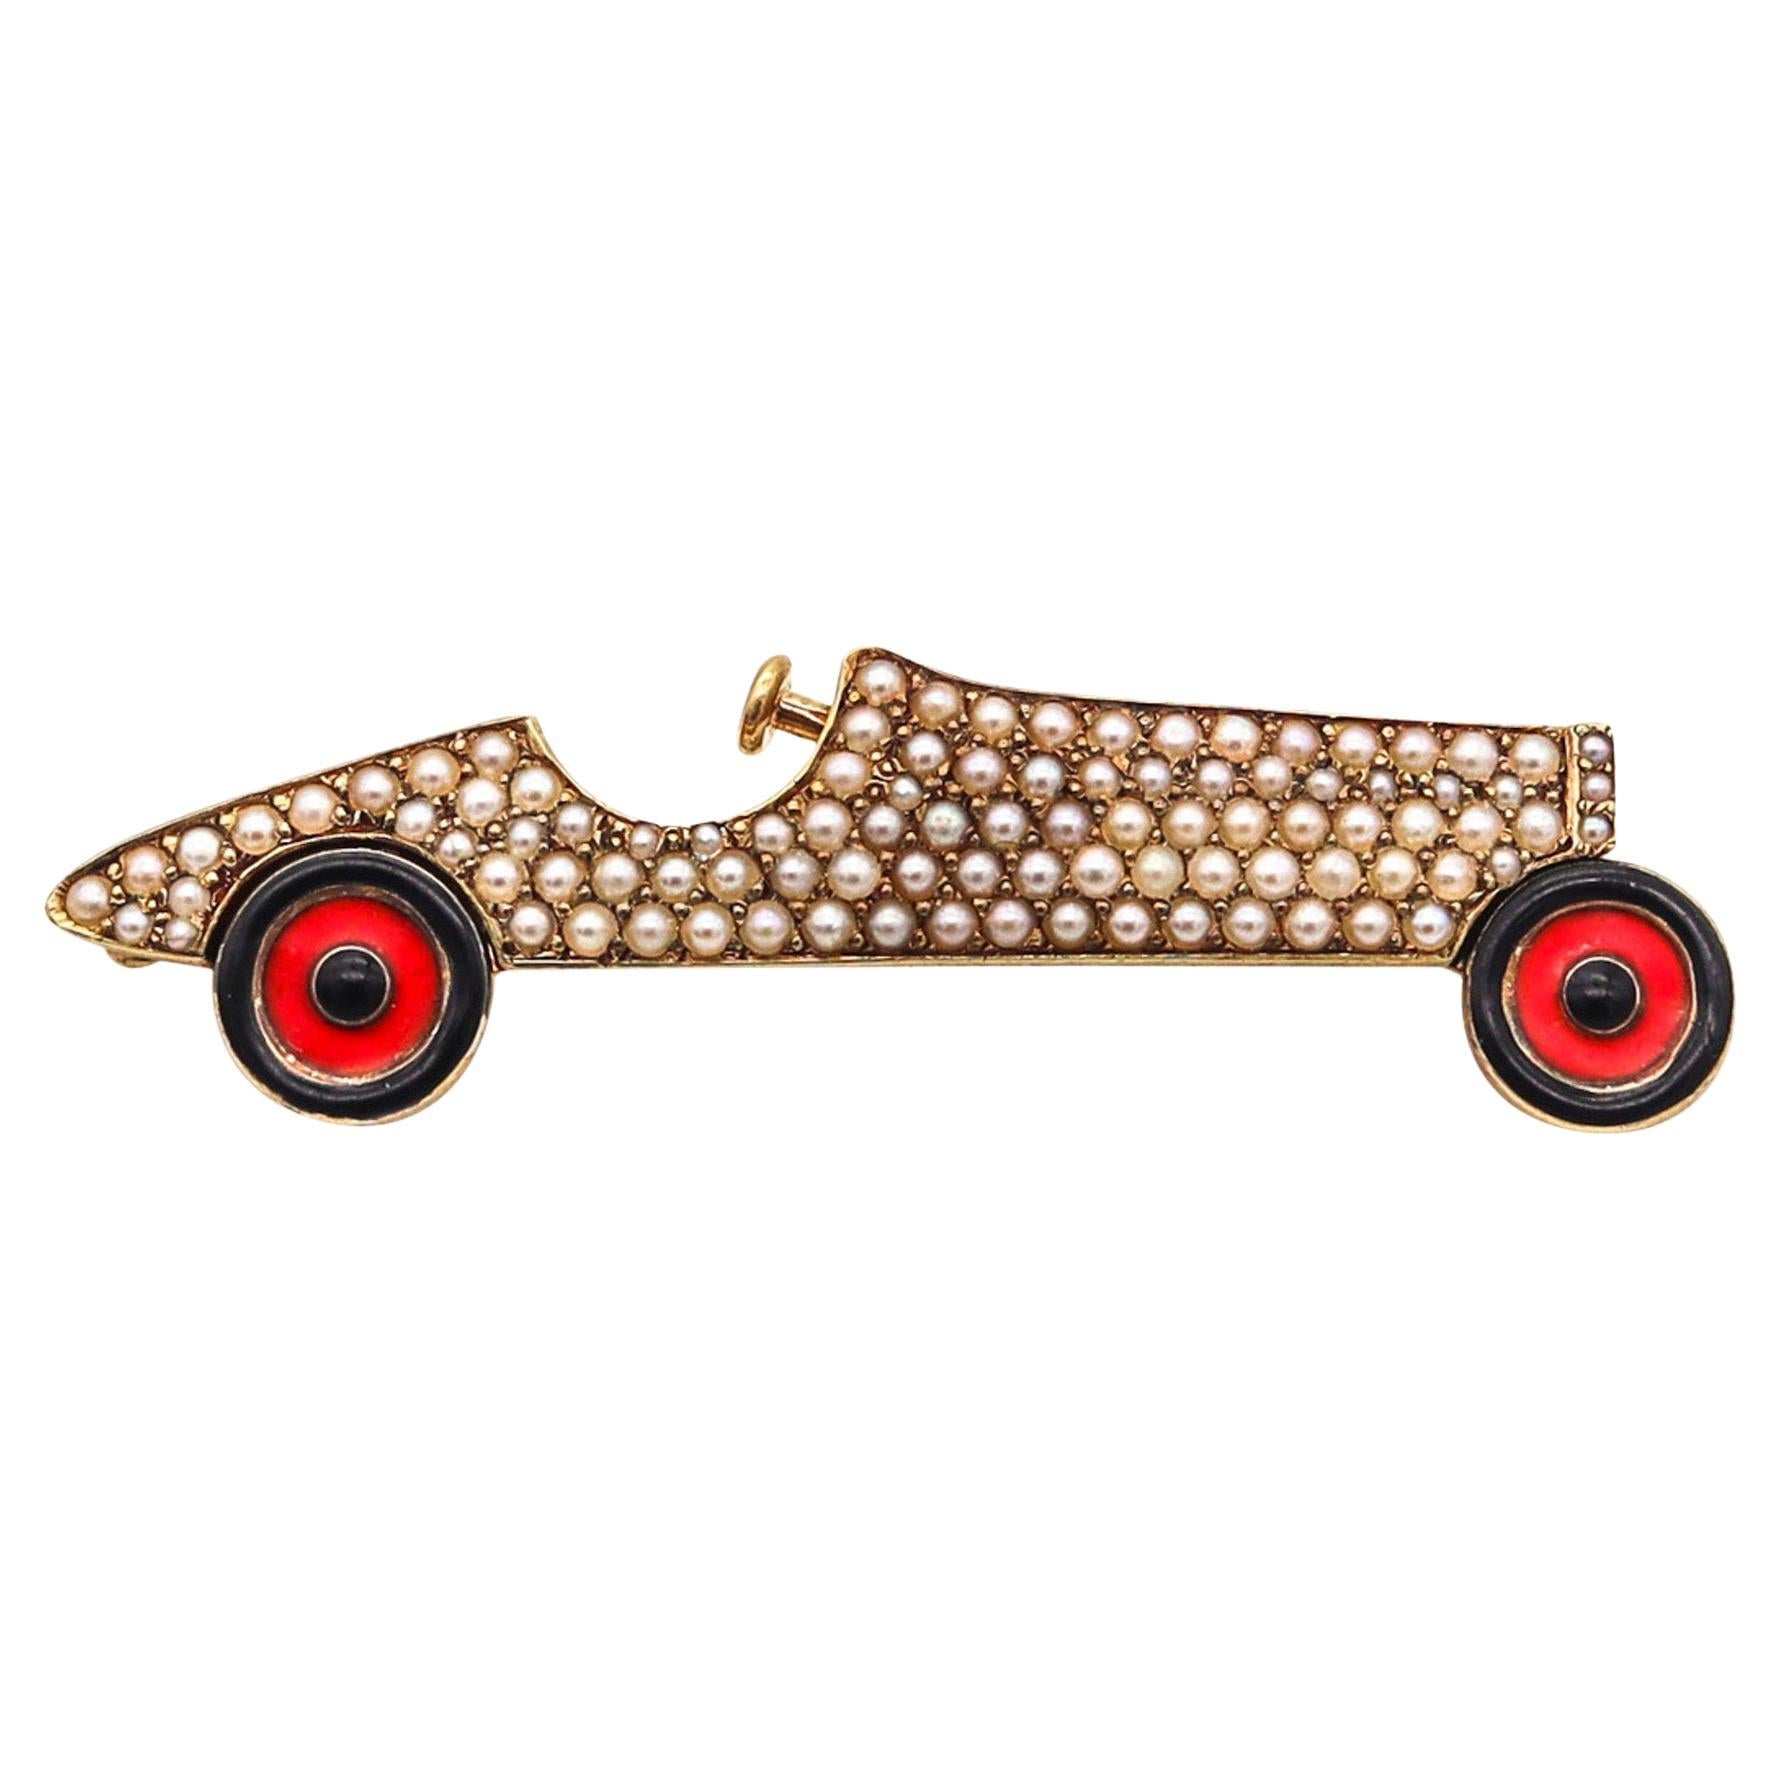 SLOAN & Co. 1920 Art Deco Enameled Racing Car Brooch In 14Kt Gold With Pearls For Sale